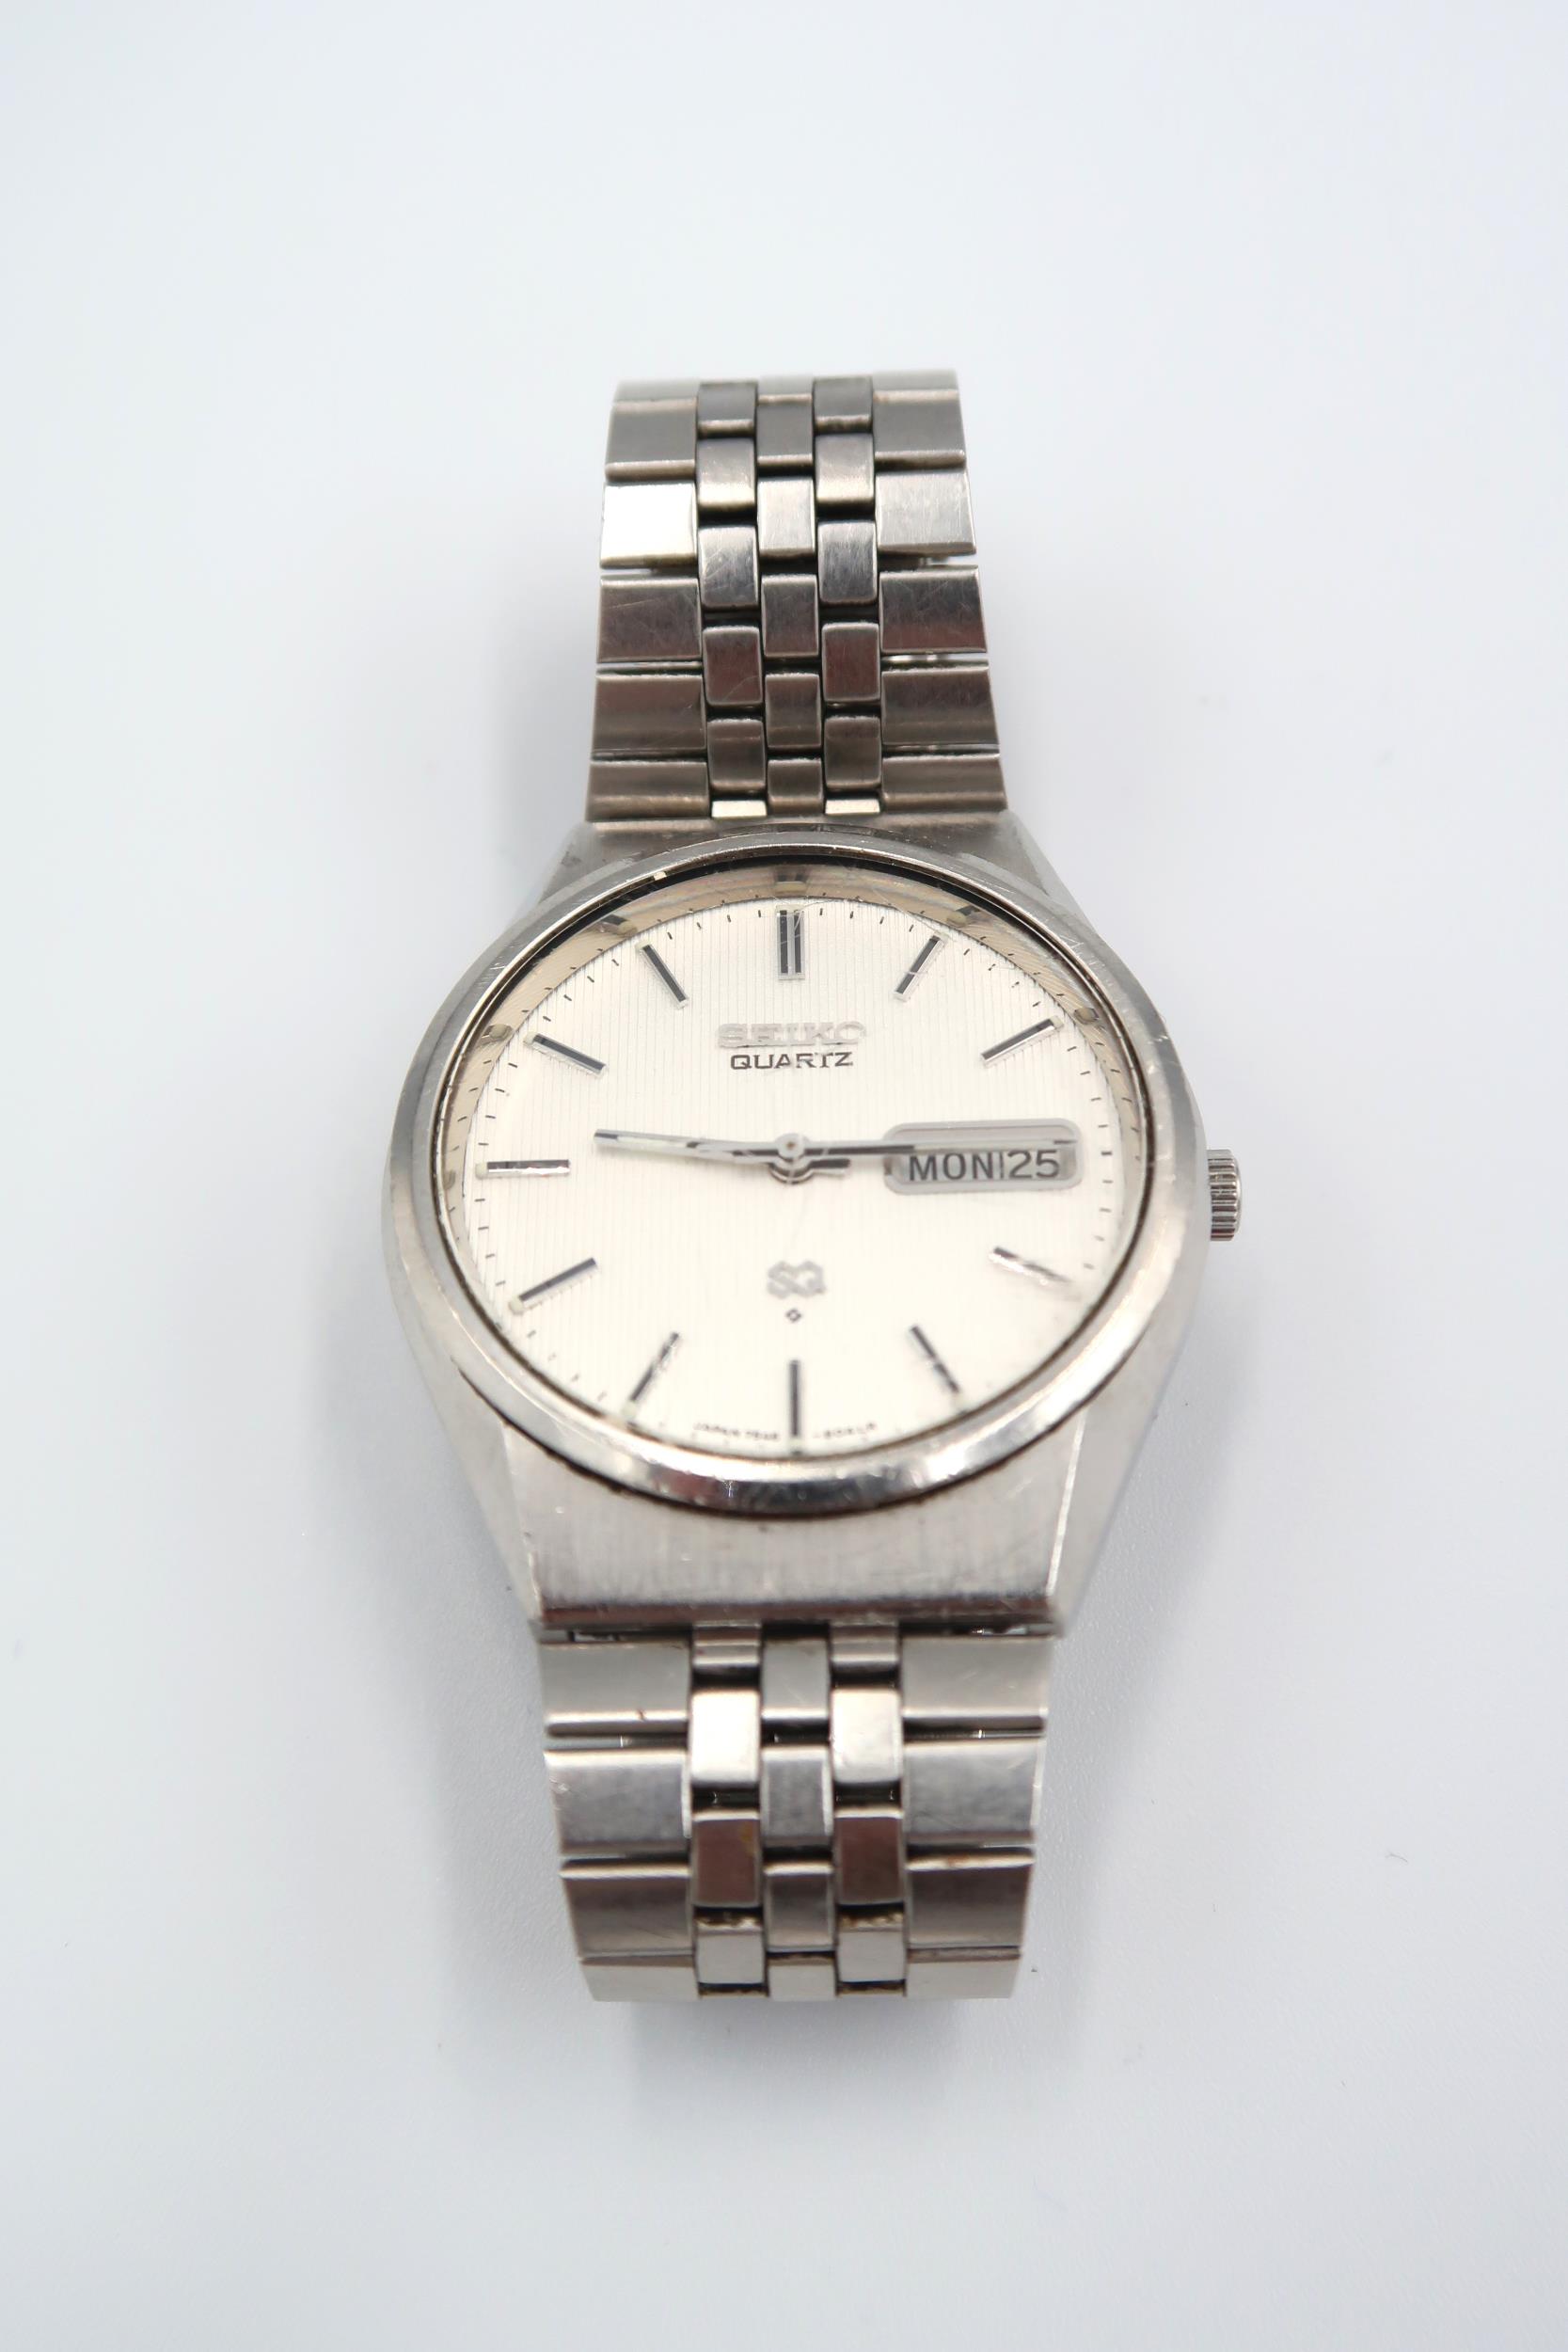 A Seiko gents watch with baton markers, day date aperture at 3 o'clock